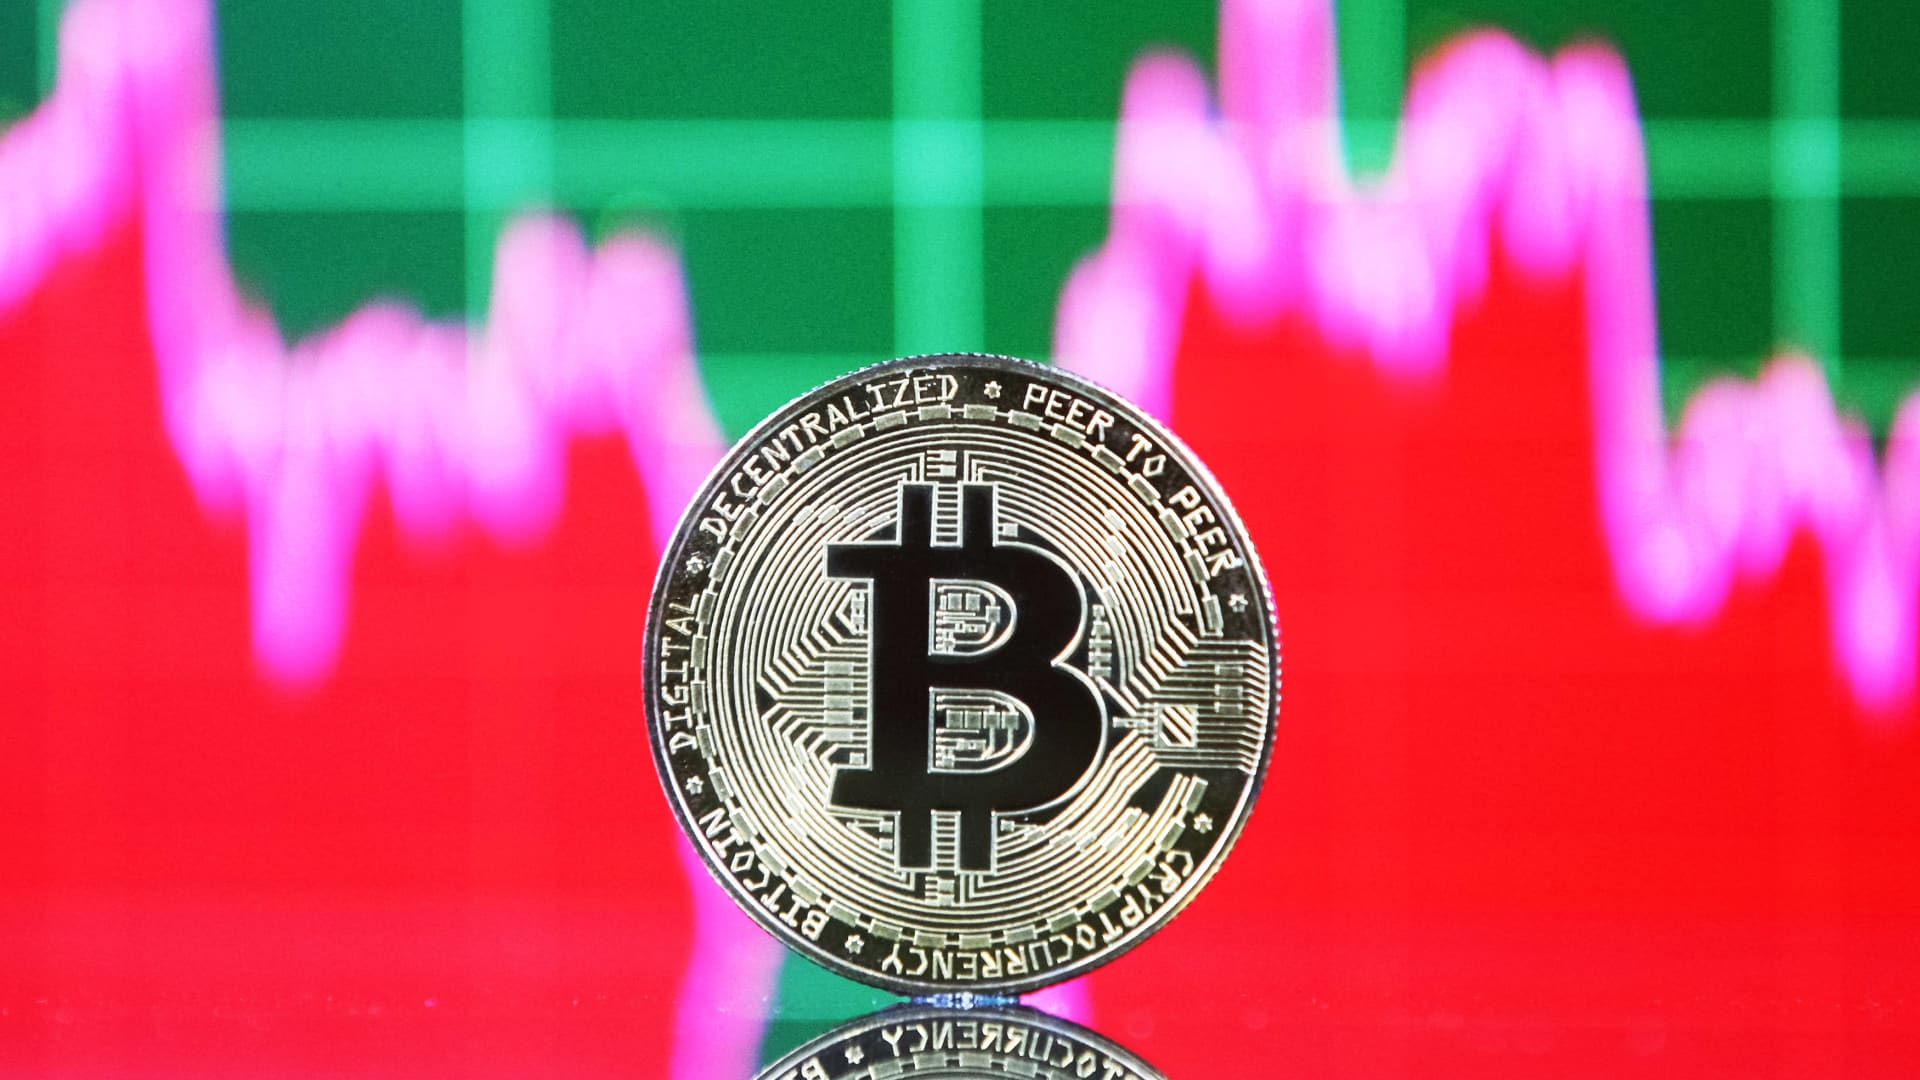 Bitcoin surges 7% to top ,000, its highest level in more than a week, even as stocks hit 2022 lows